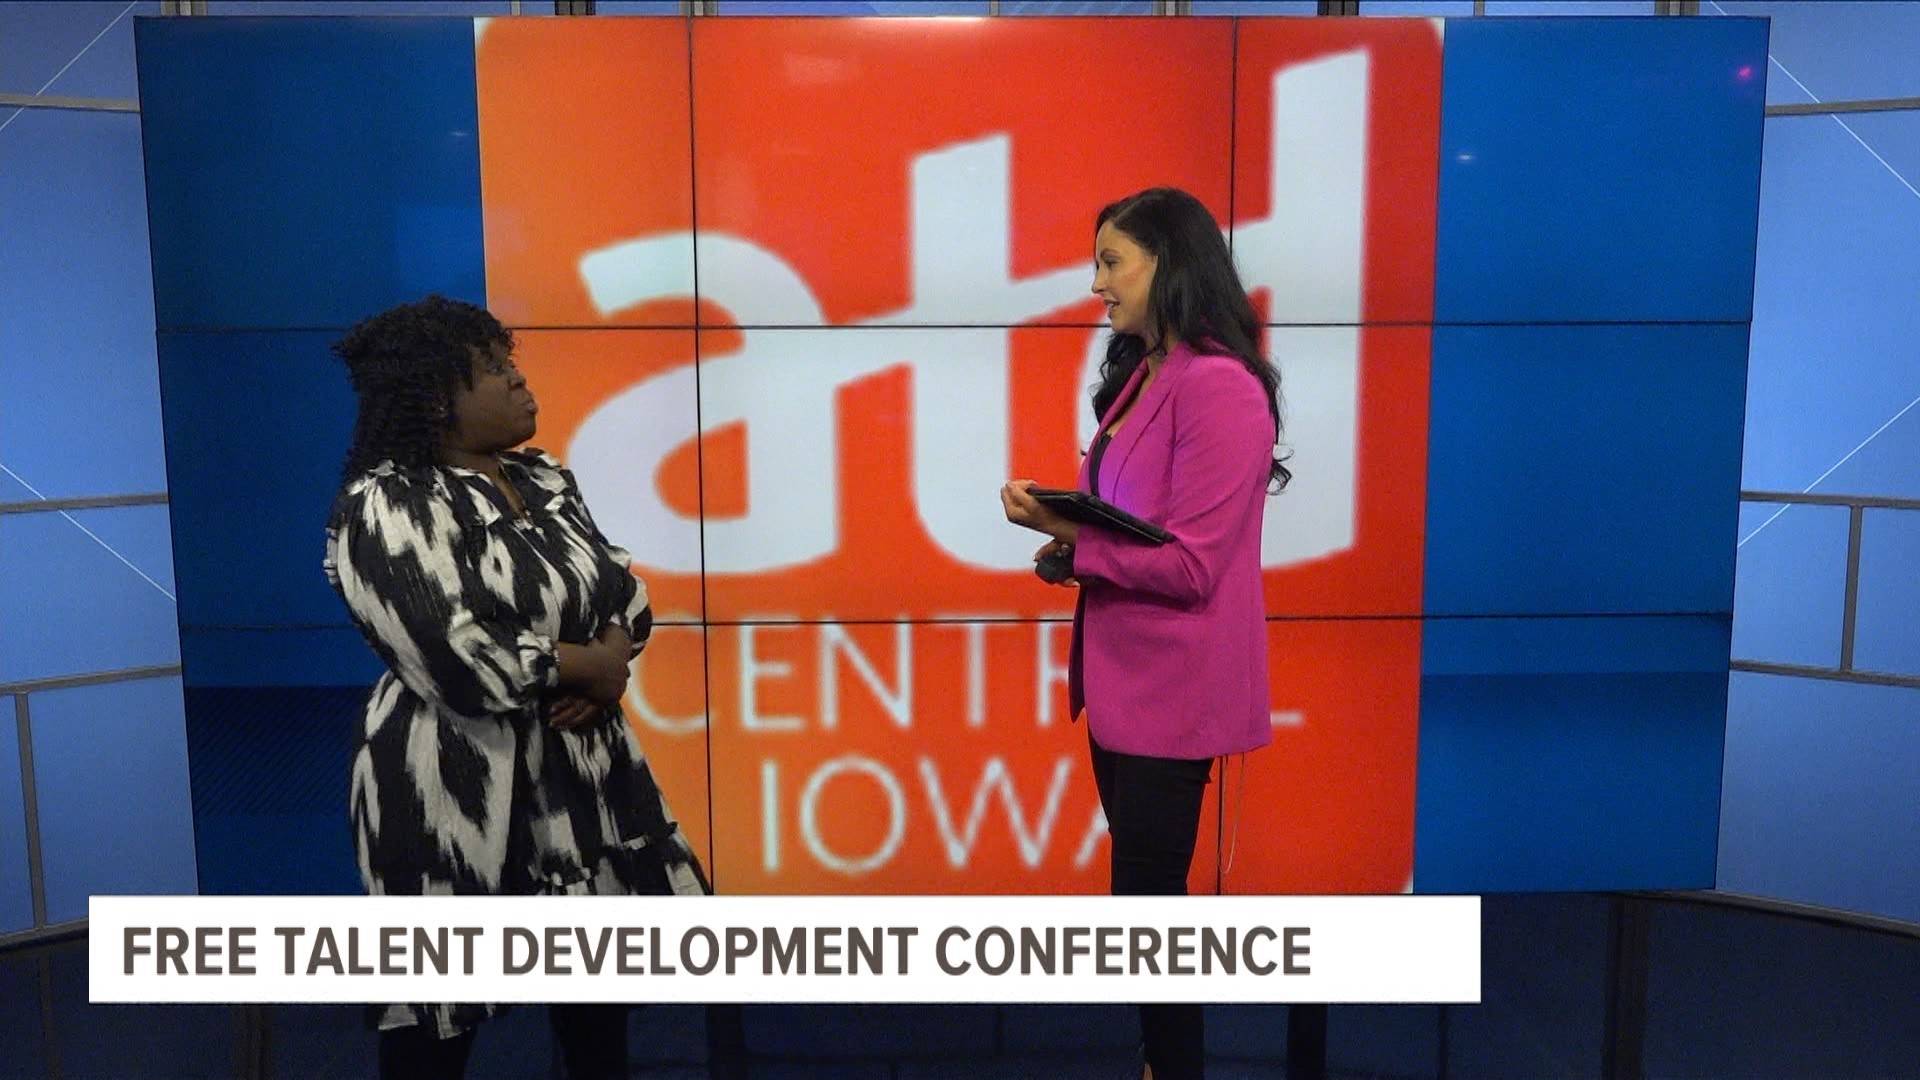 The Central Iowa Association for Talent Development talks about some upcoming events.